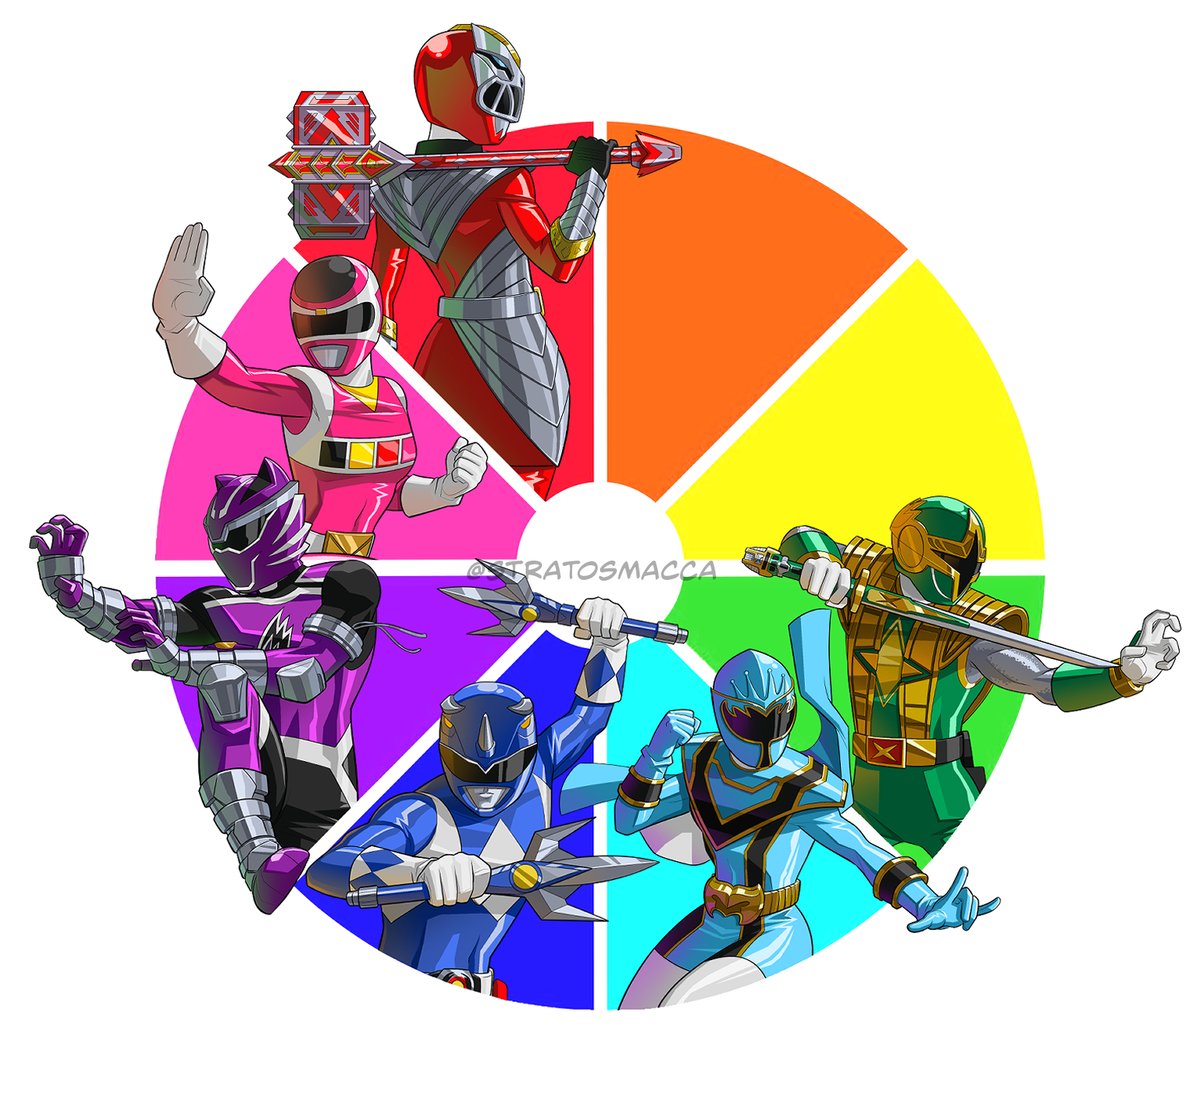 My #PowerRangers Color Wheel challenge... GREEN = Cam! I knew I wanted to draw him from the beginning, tbh. Never drawn any Ninja Storm Rangers and this is one of my fav suit designs! (Also, Happy #PowerRangersDay!!) ⚡️ #PowerMonth #PowerRangers30 #NinjaStorm